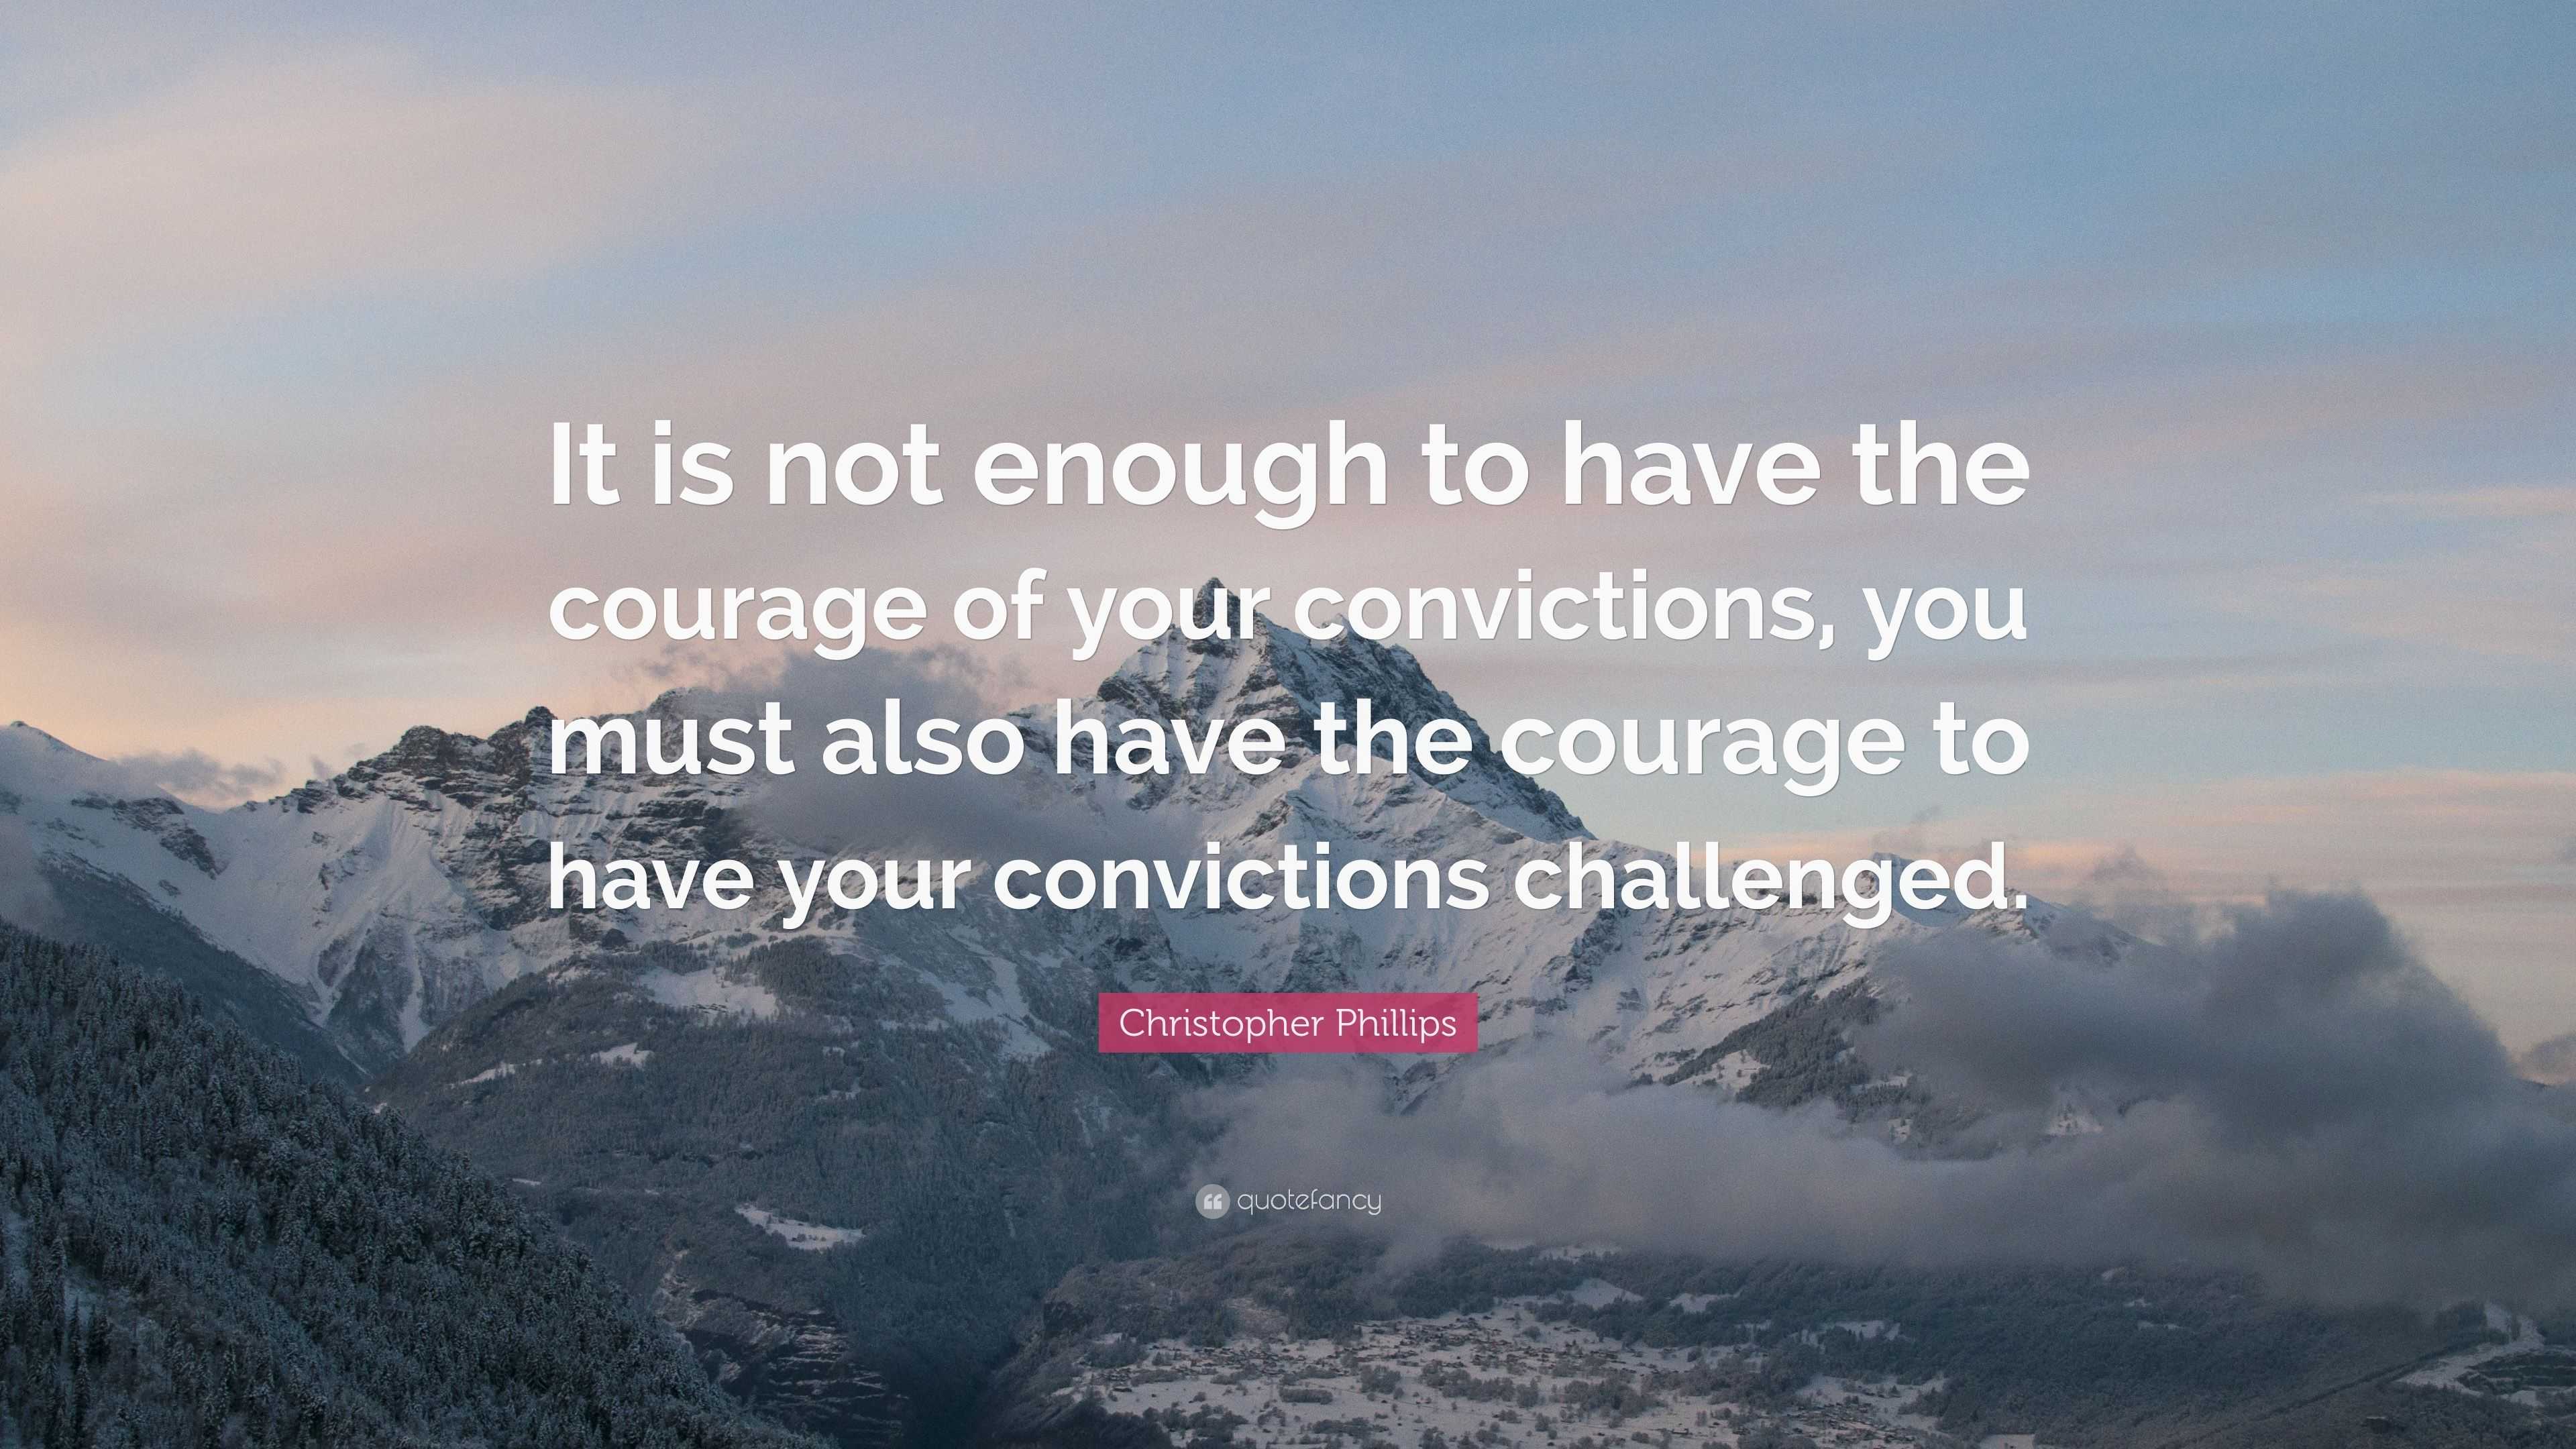 Christopher Phillips Quote: “It is not enough to have the courage of ...